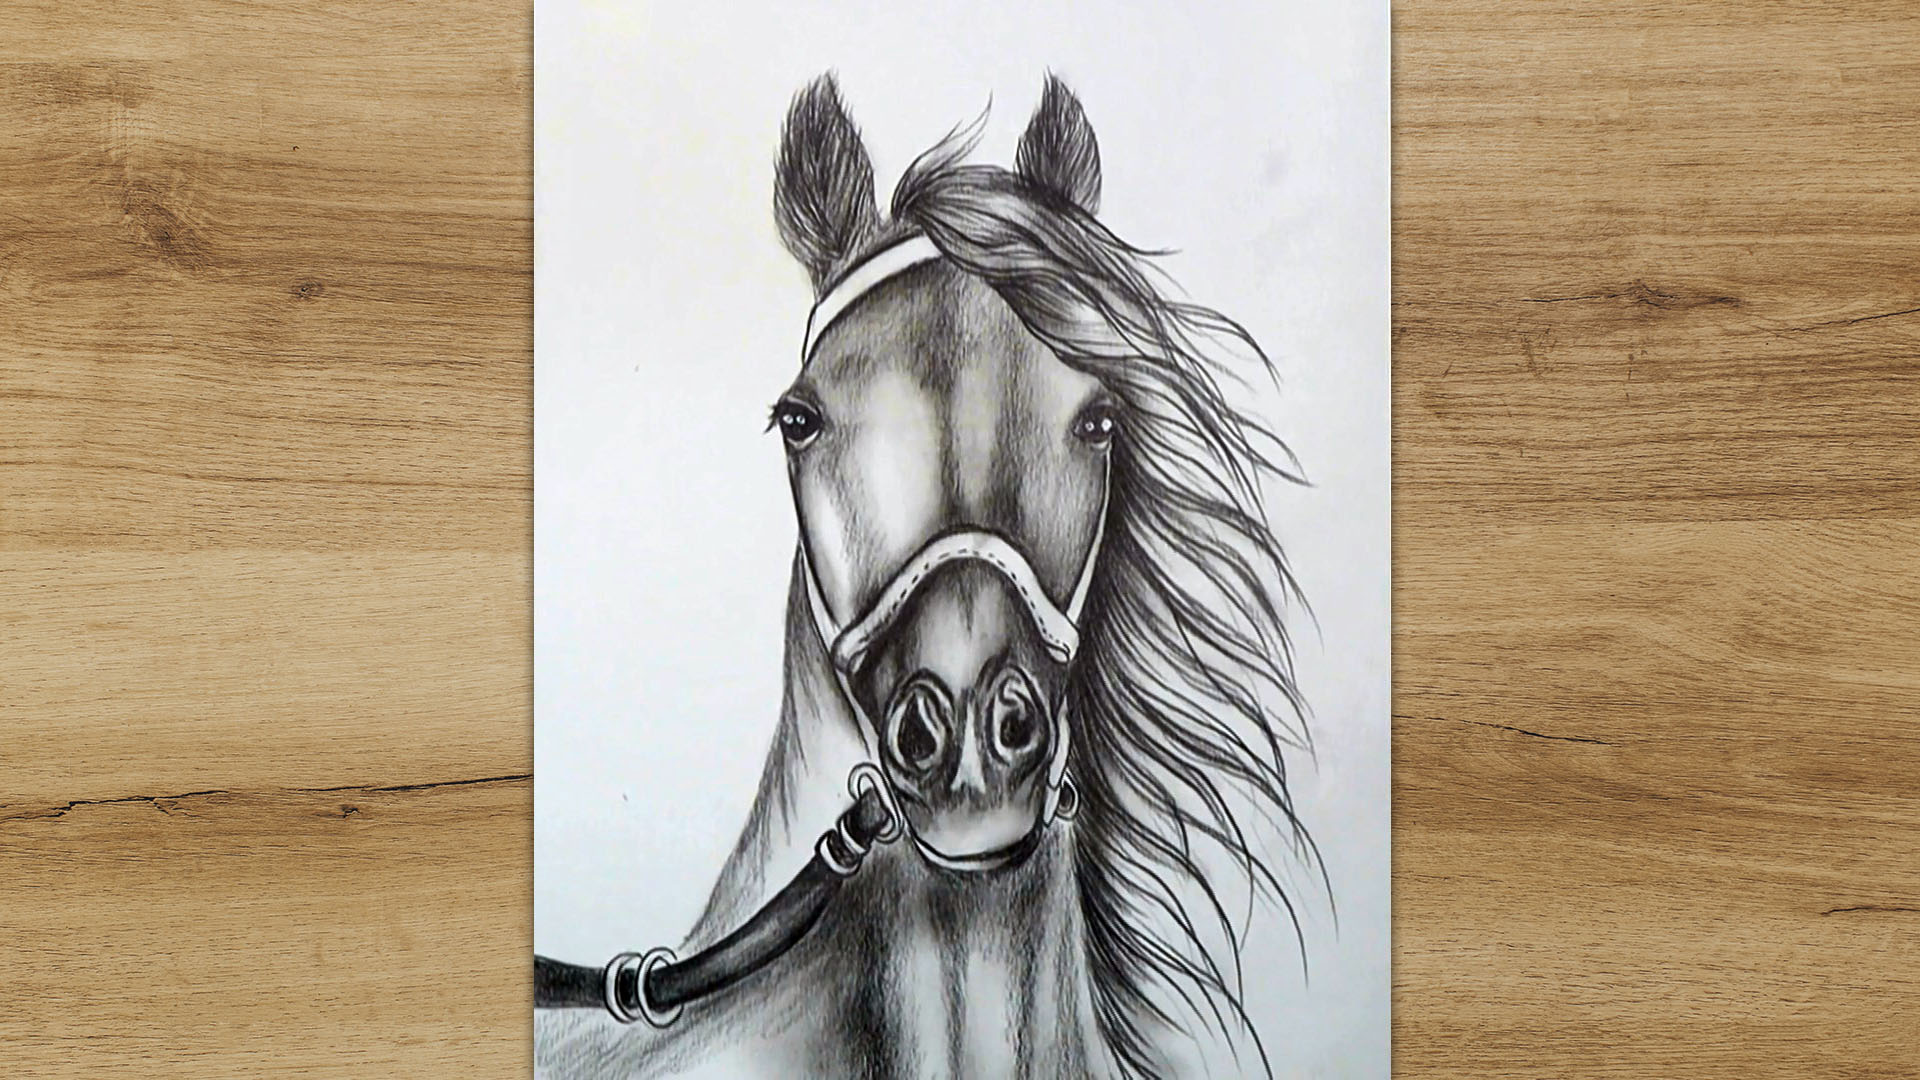 Horse Face Stock Illustrations Cliparts and Royalty Free Horse Face Vectors